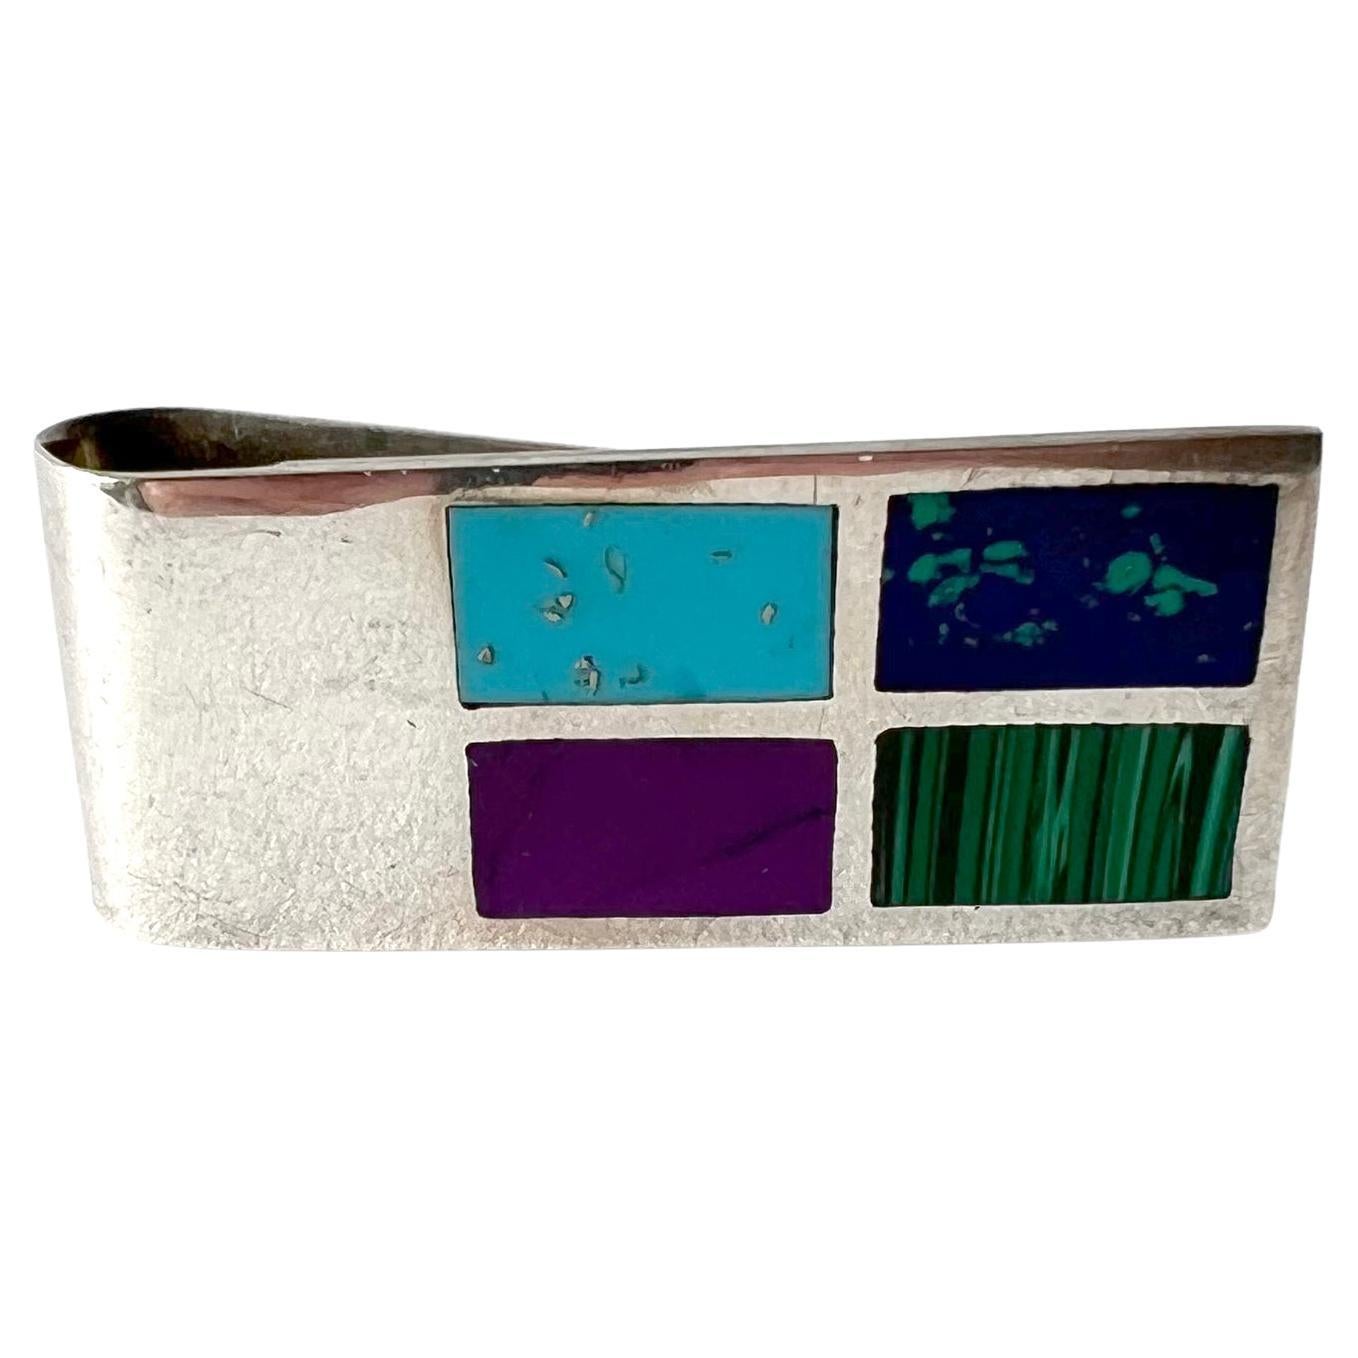 Striking 1970s Mexican modernist sterling silver money clip with natural gemstones set in mosaic style.  Clip measures 2.25